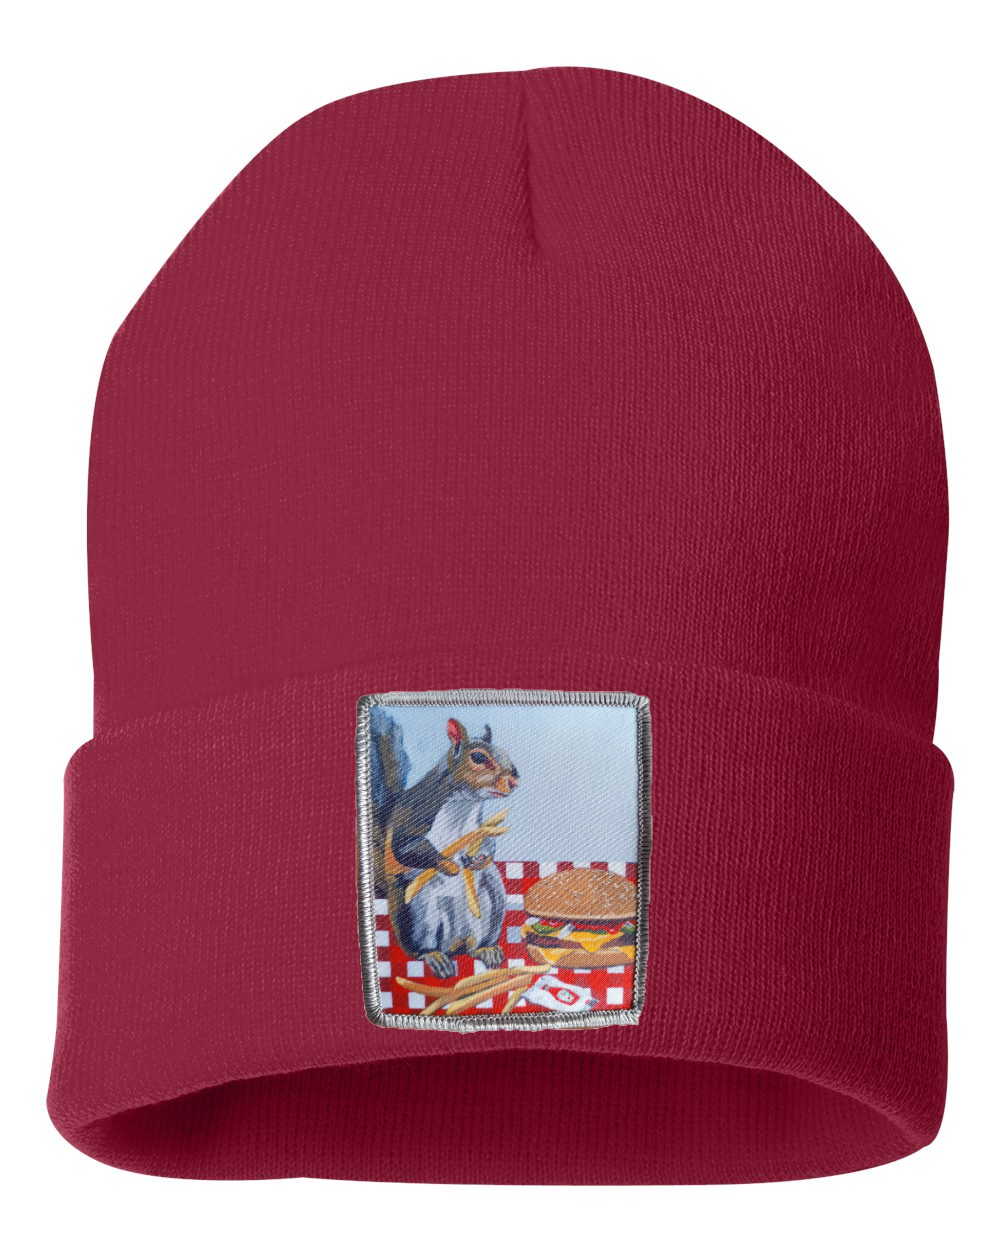 Squirrel Burger Beanie Hats Flyn_Costello_Art Cardinal Red  